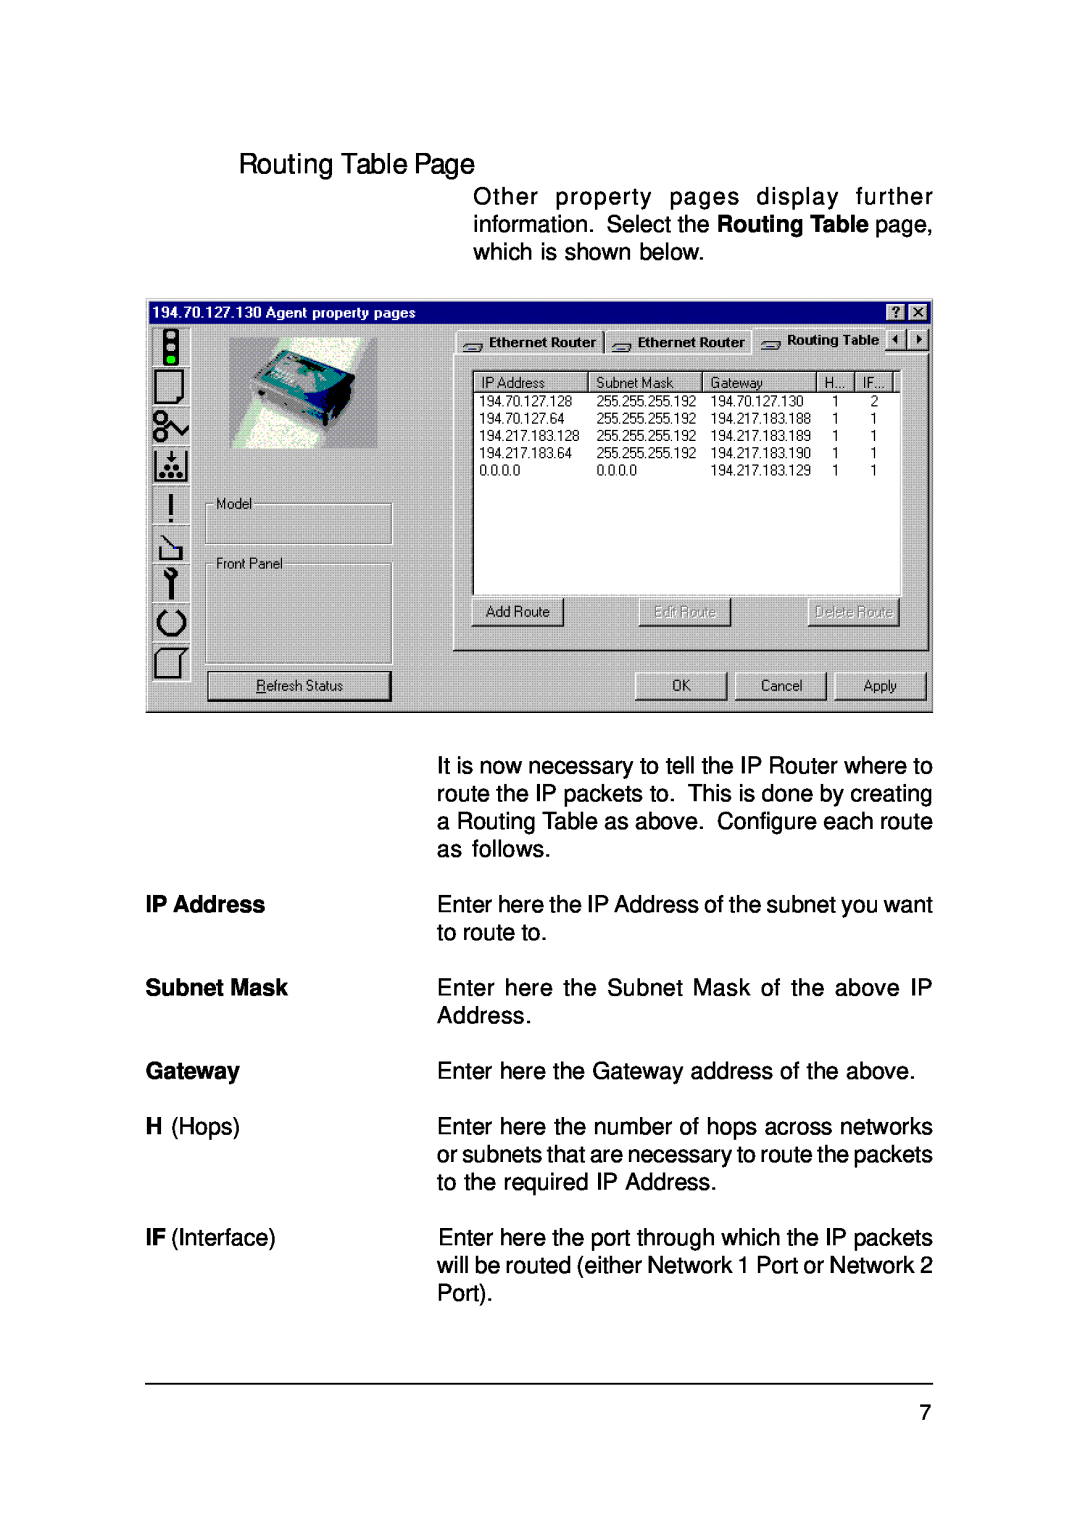 Ringdale IP Router manual Routing Table Page, Subnet Mask, Gateway, IP Address 